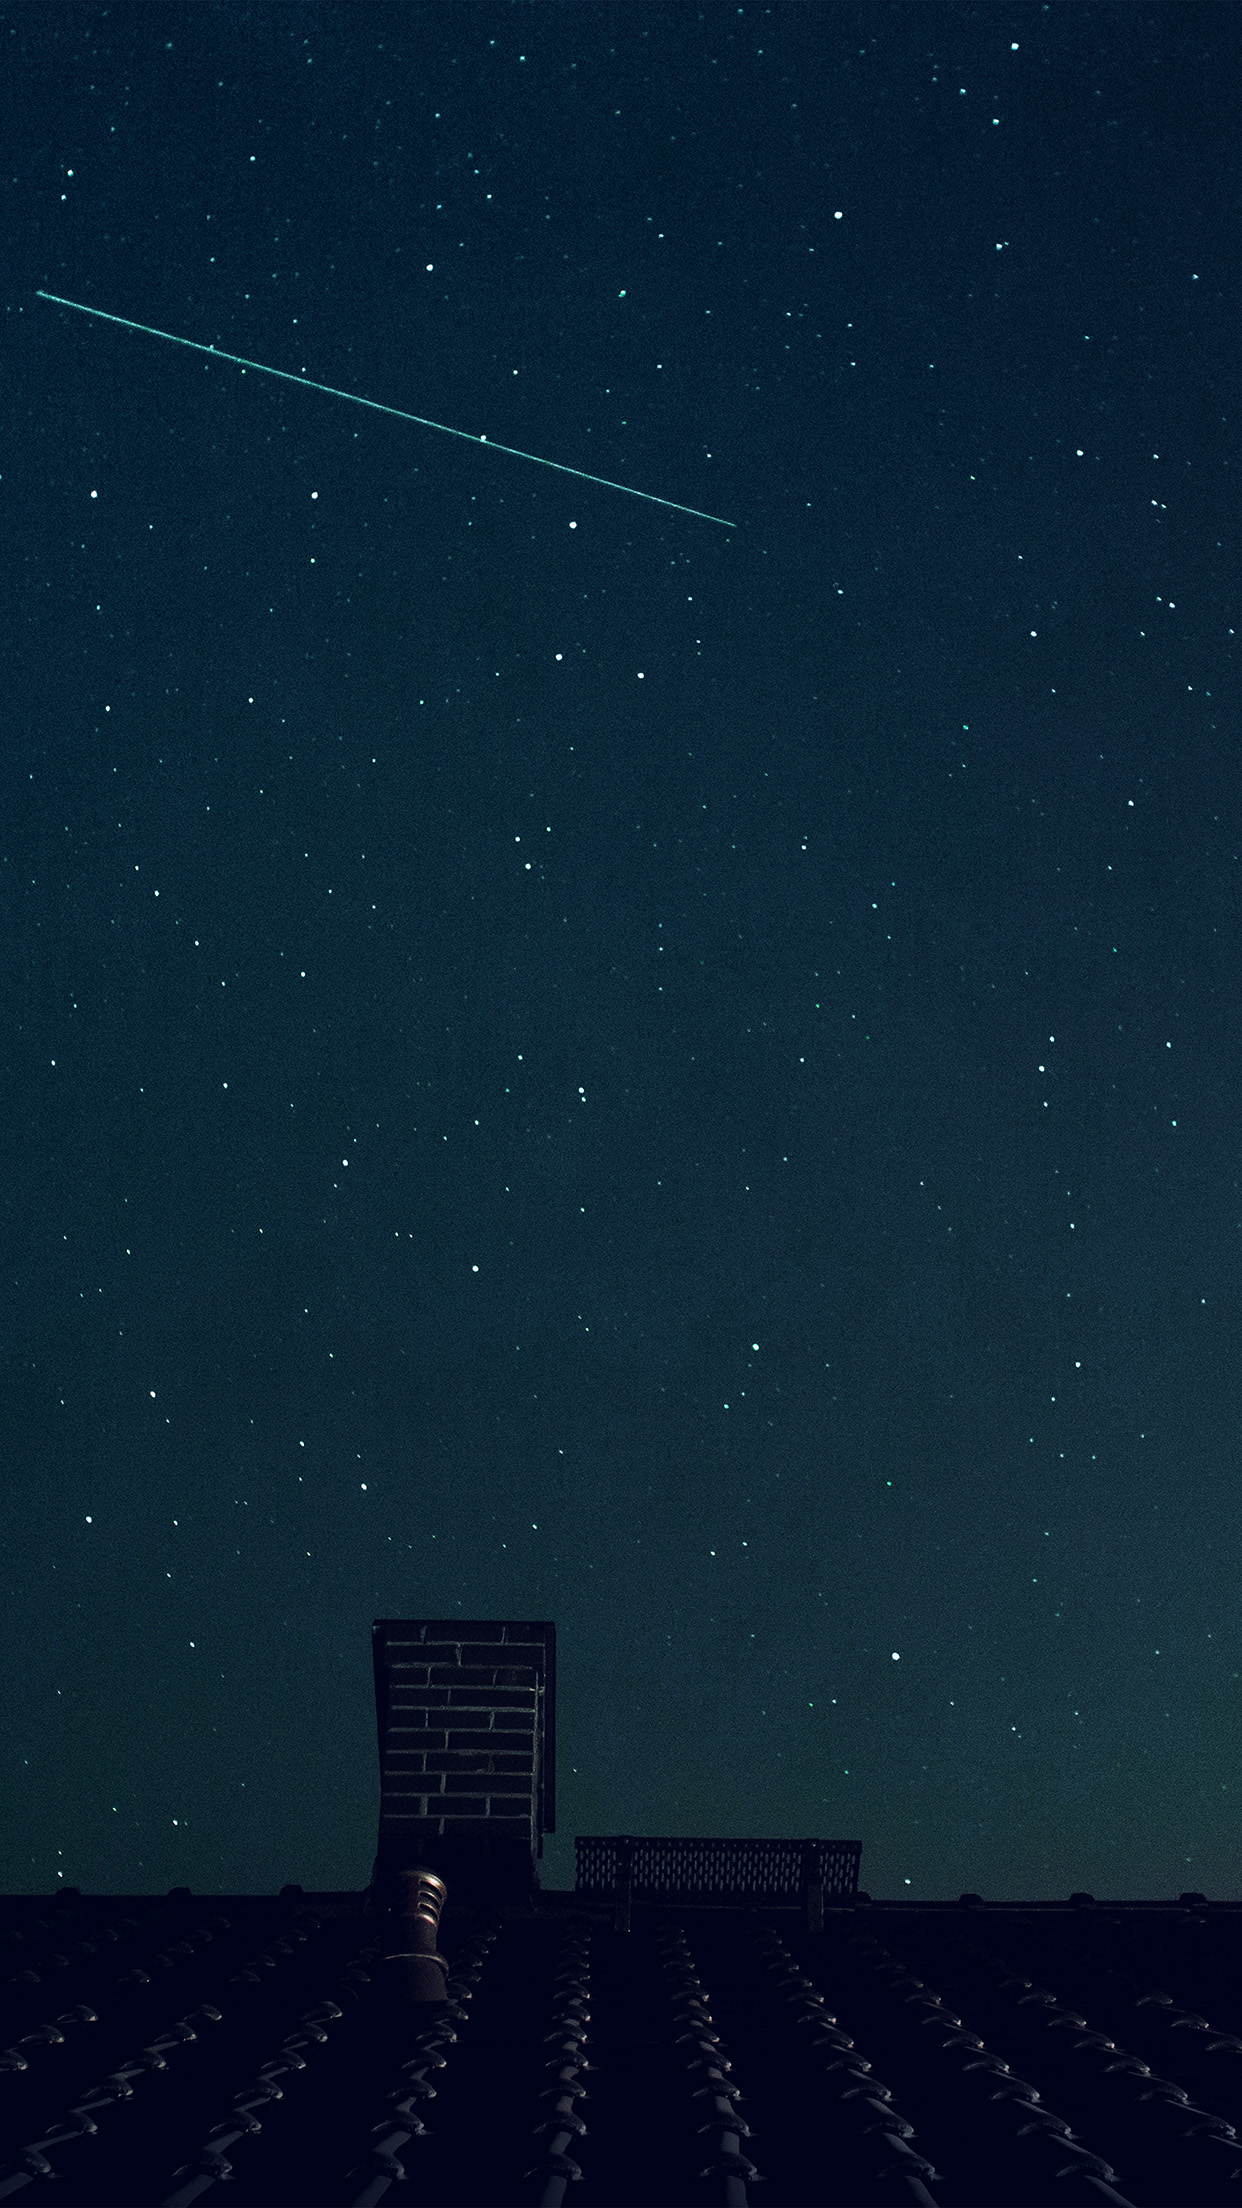 Sky Night For Iphone X - HD Wallpaper 